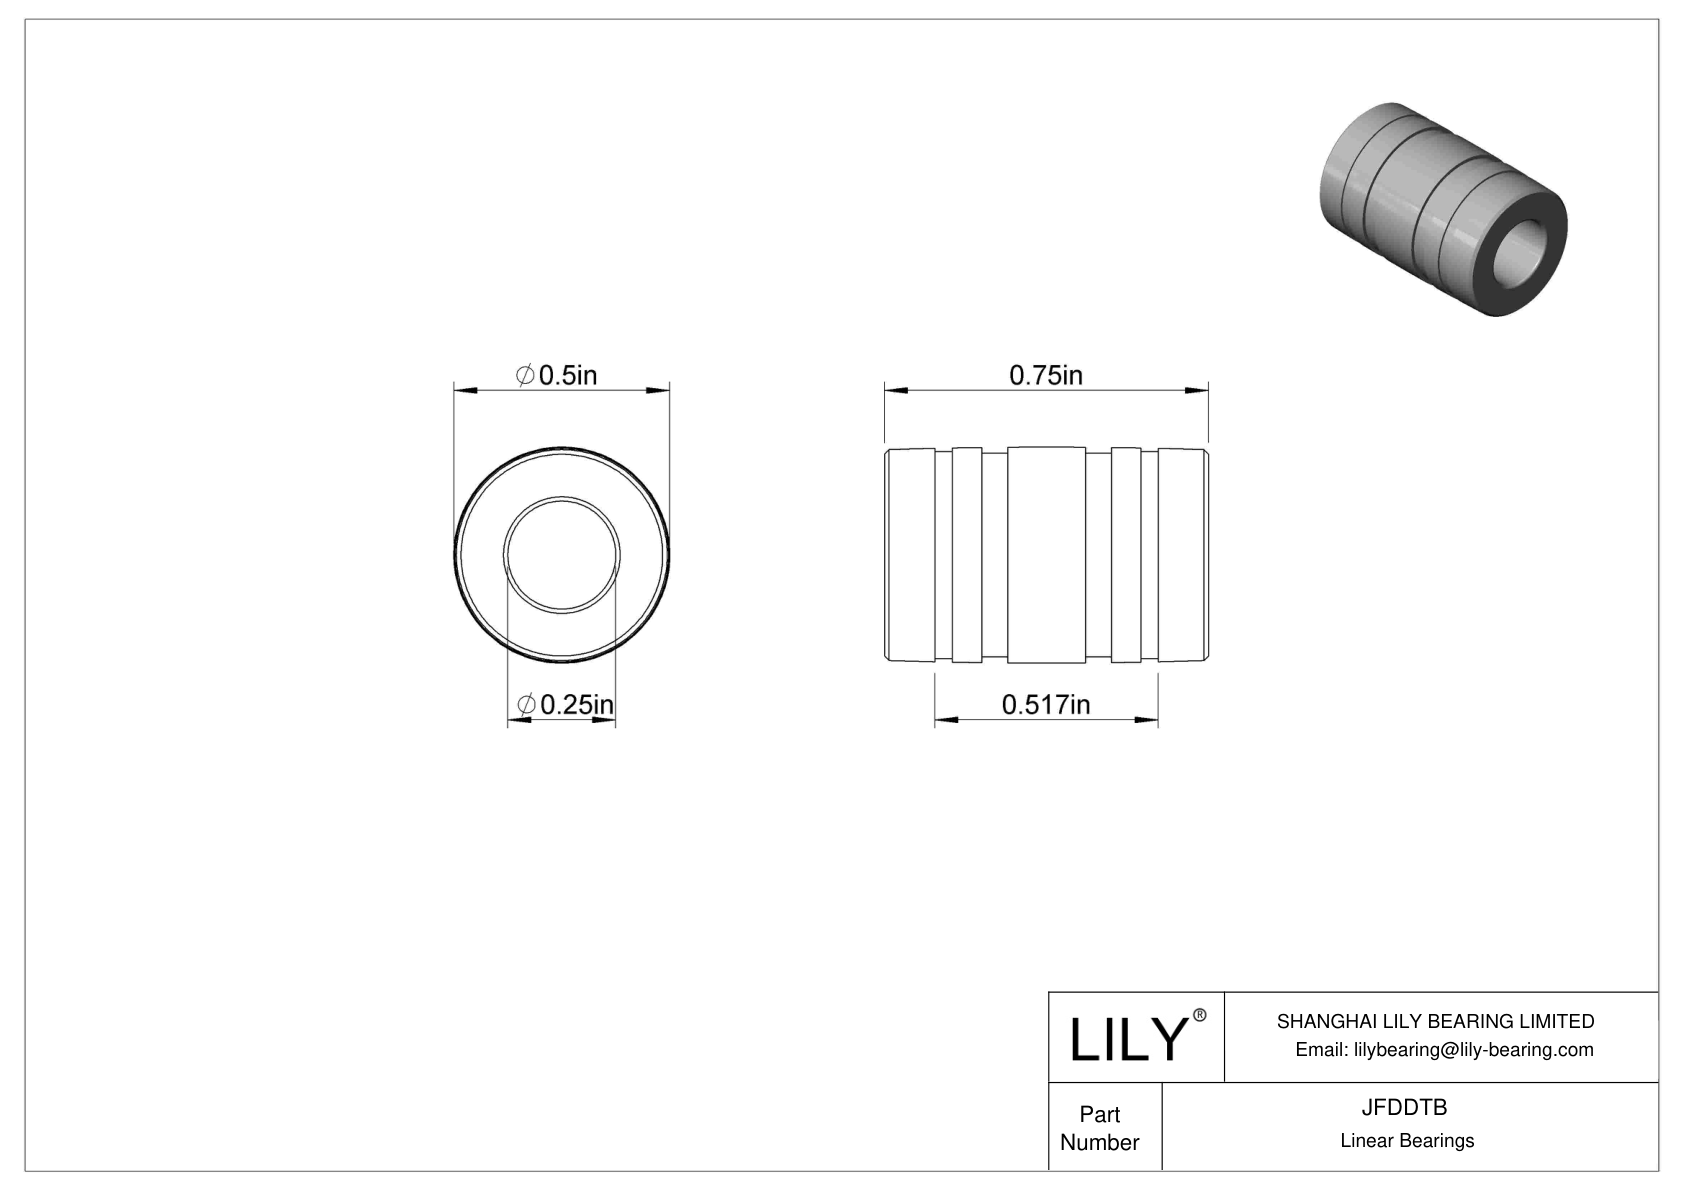 JFDDTB Common Linear Sleeve Bearings cad drawing